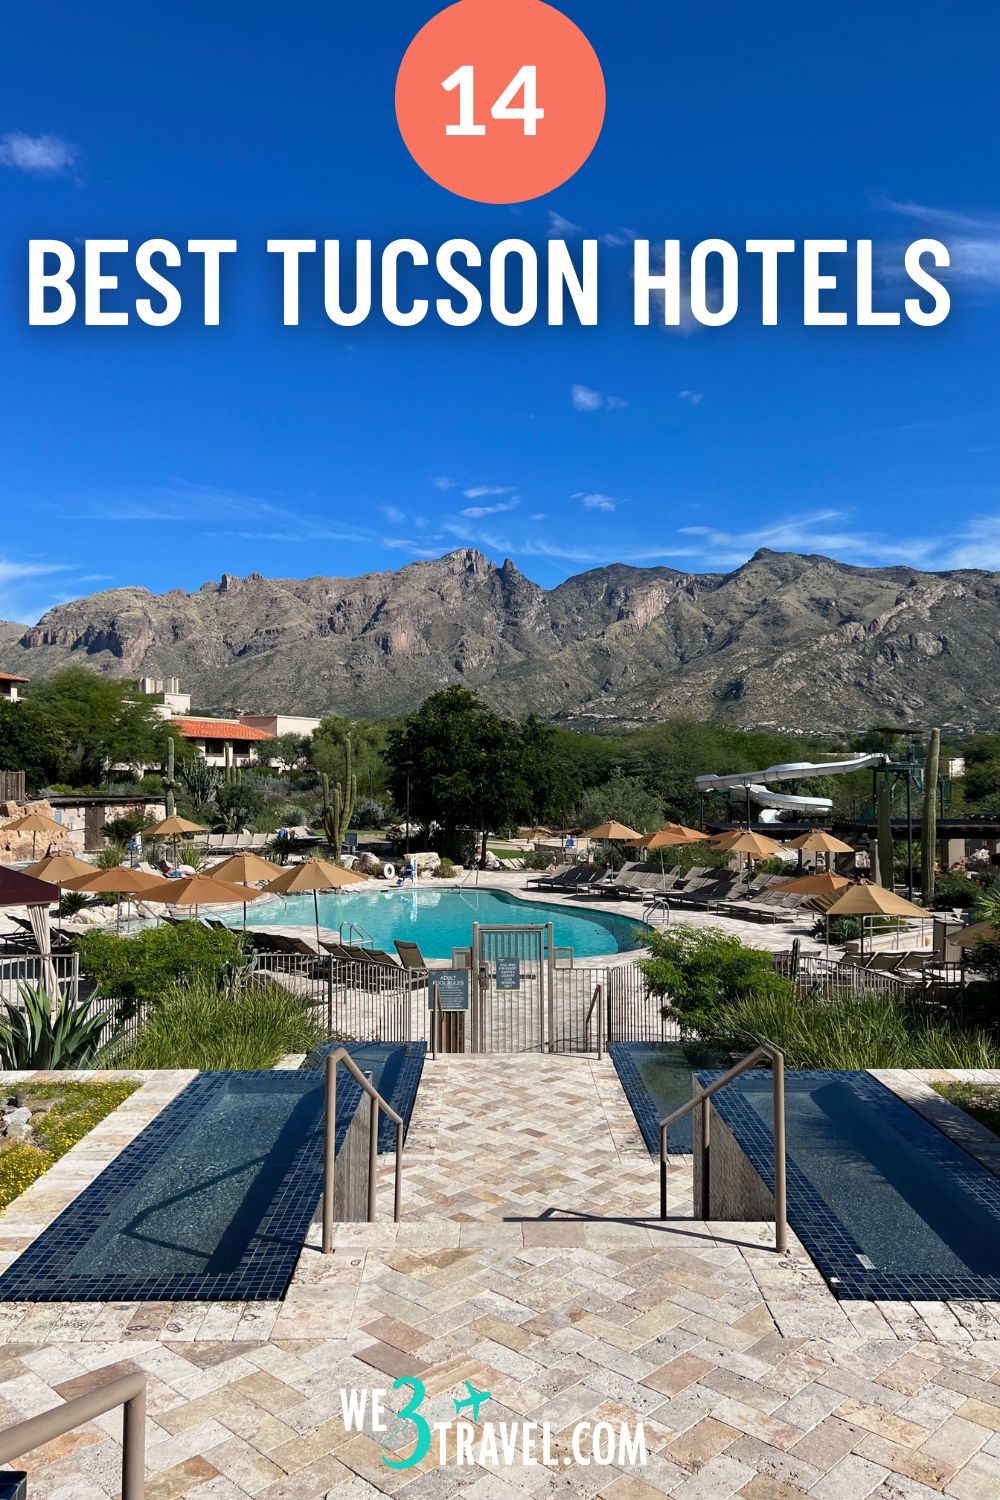 Looking for the best places to stay in Tucson? Whether you're looking for a downtown hotel, a resort for families, or a spa resort, we've got you covered. Check out our list of the 14 best places to stay in Tucson, broken down by location and style of stay.